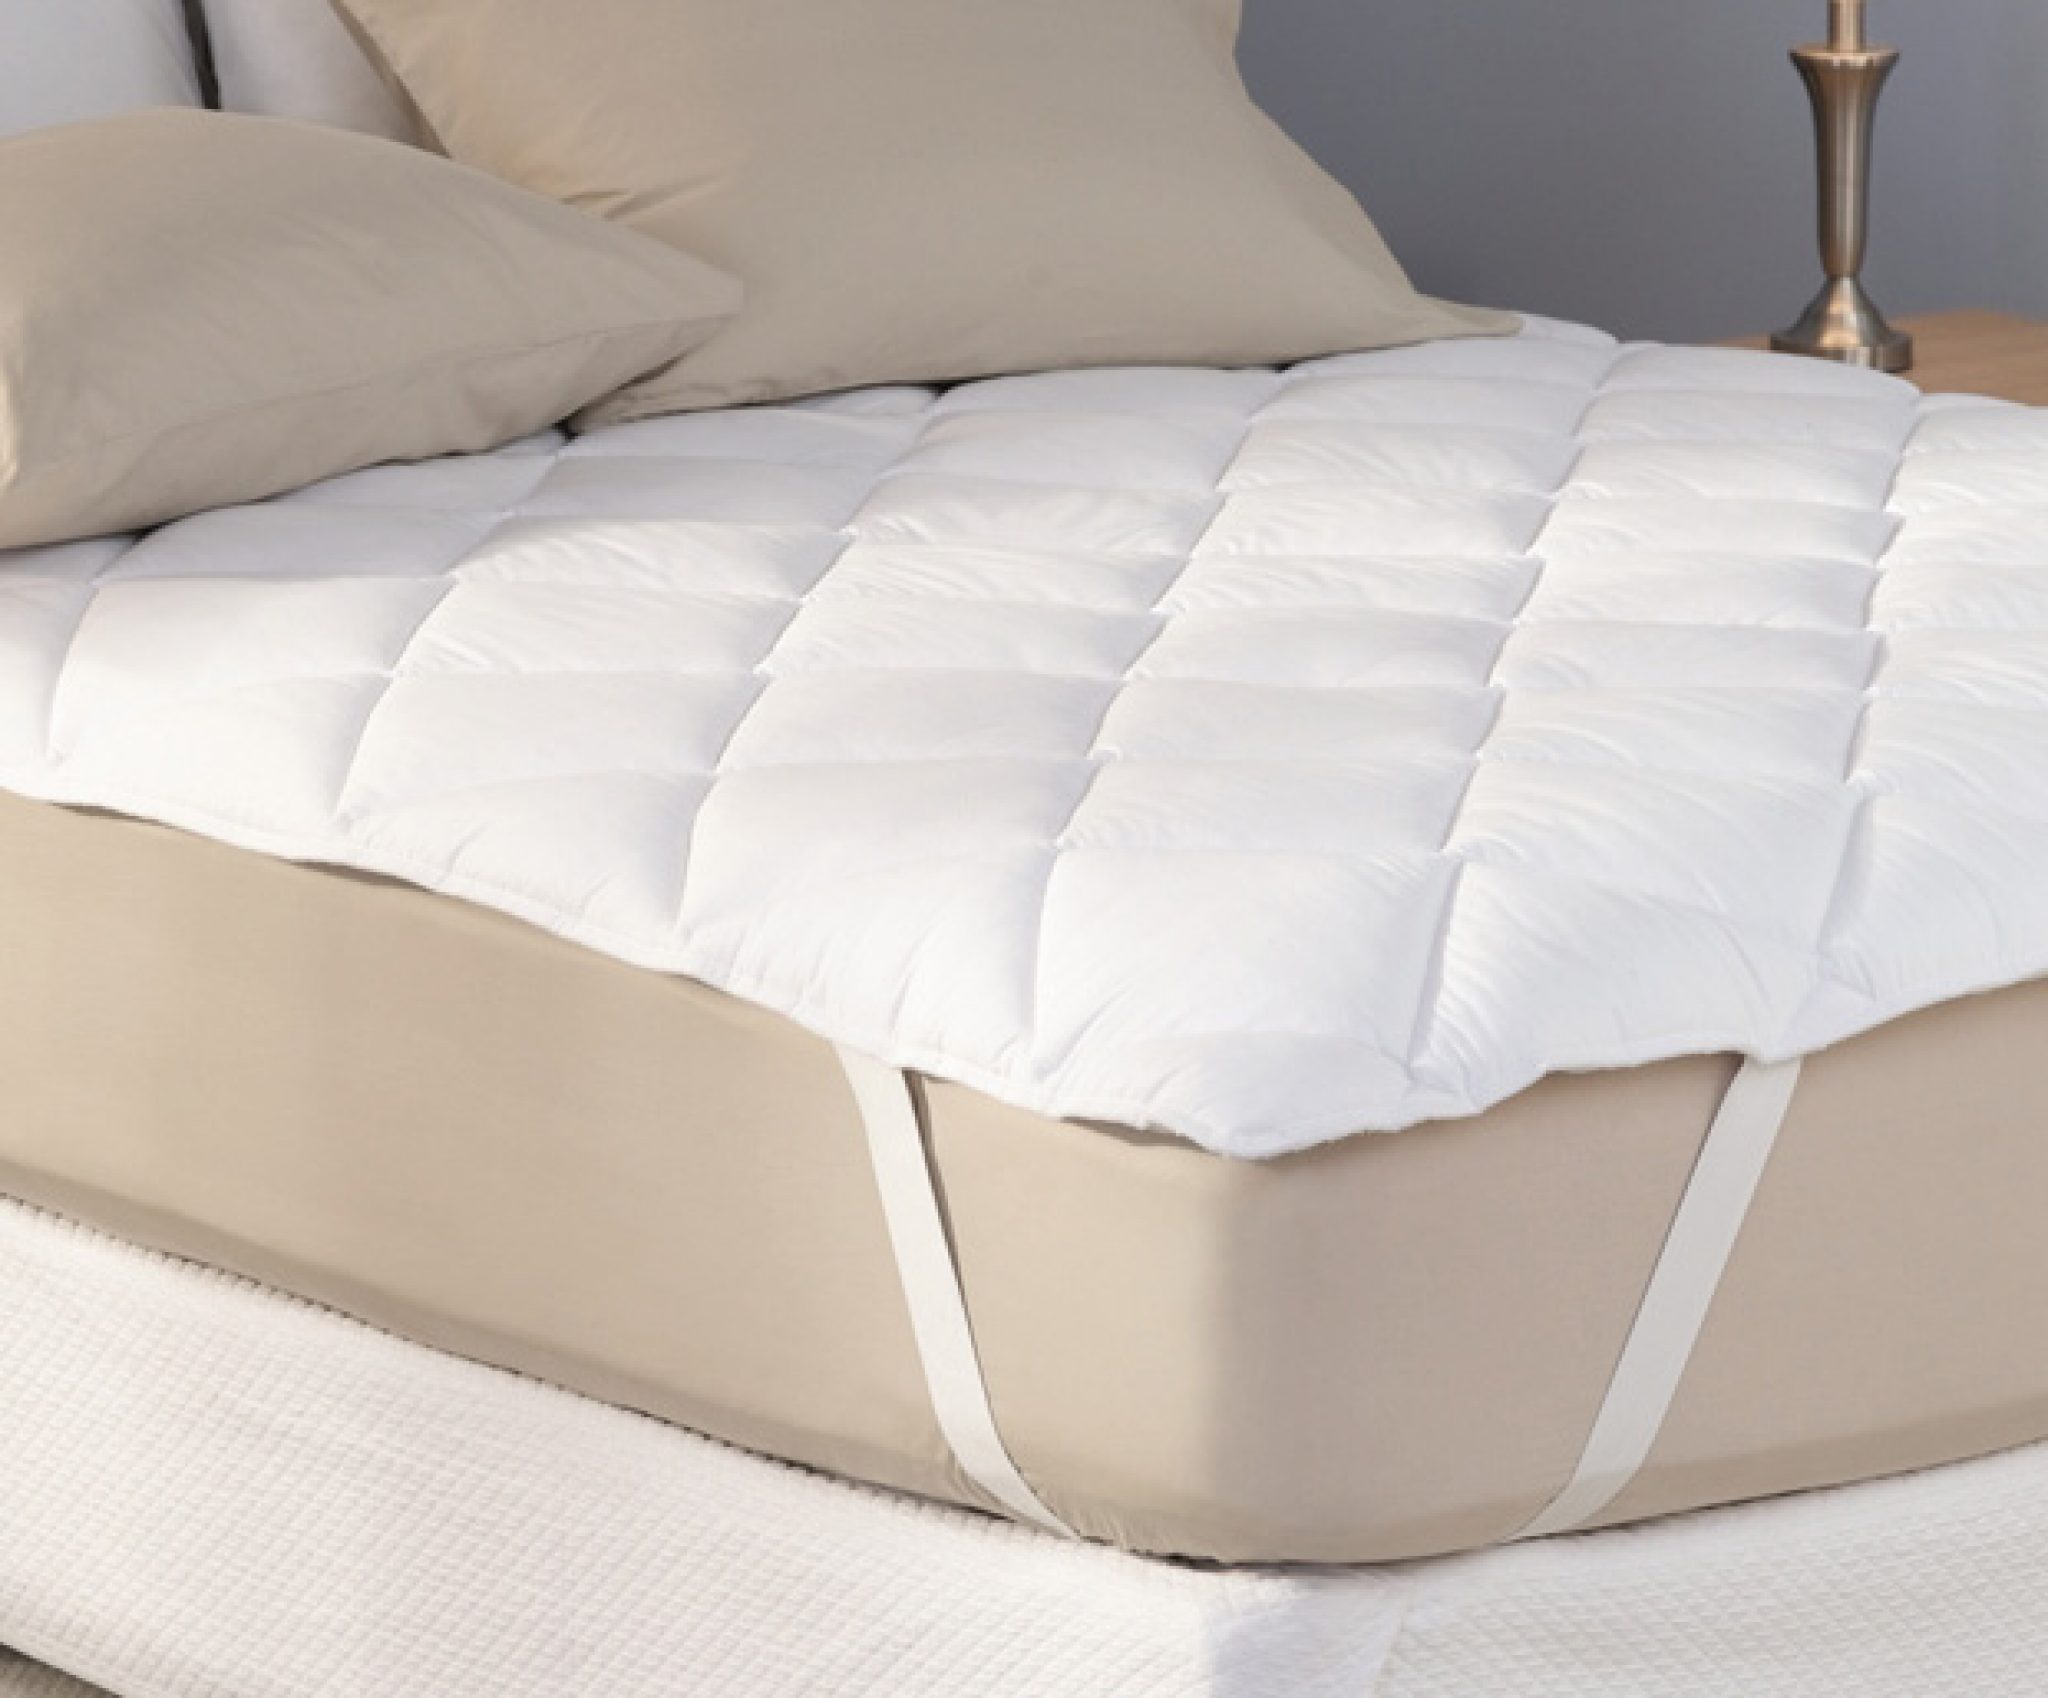 pad to keep mattress from sliding